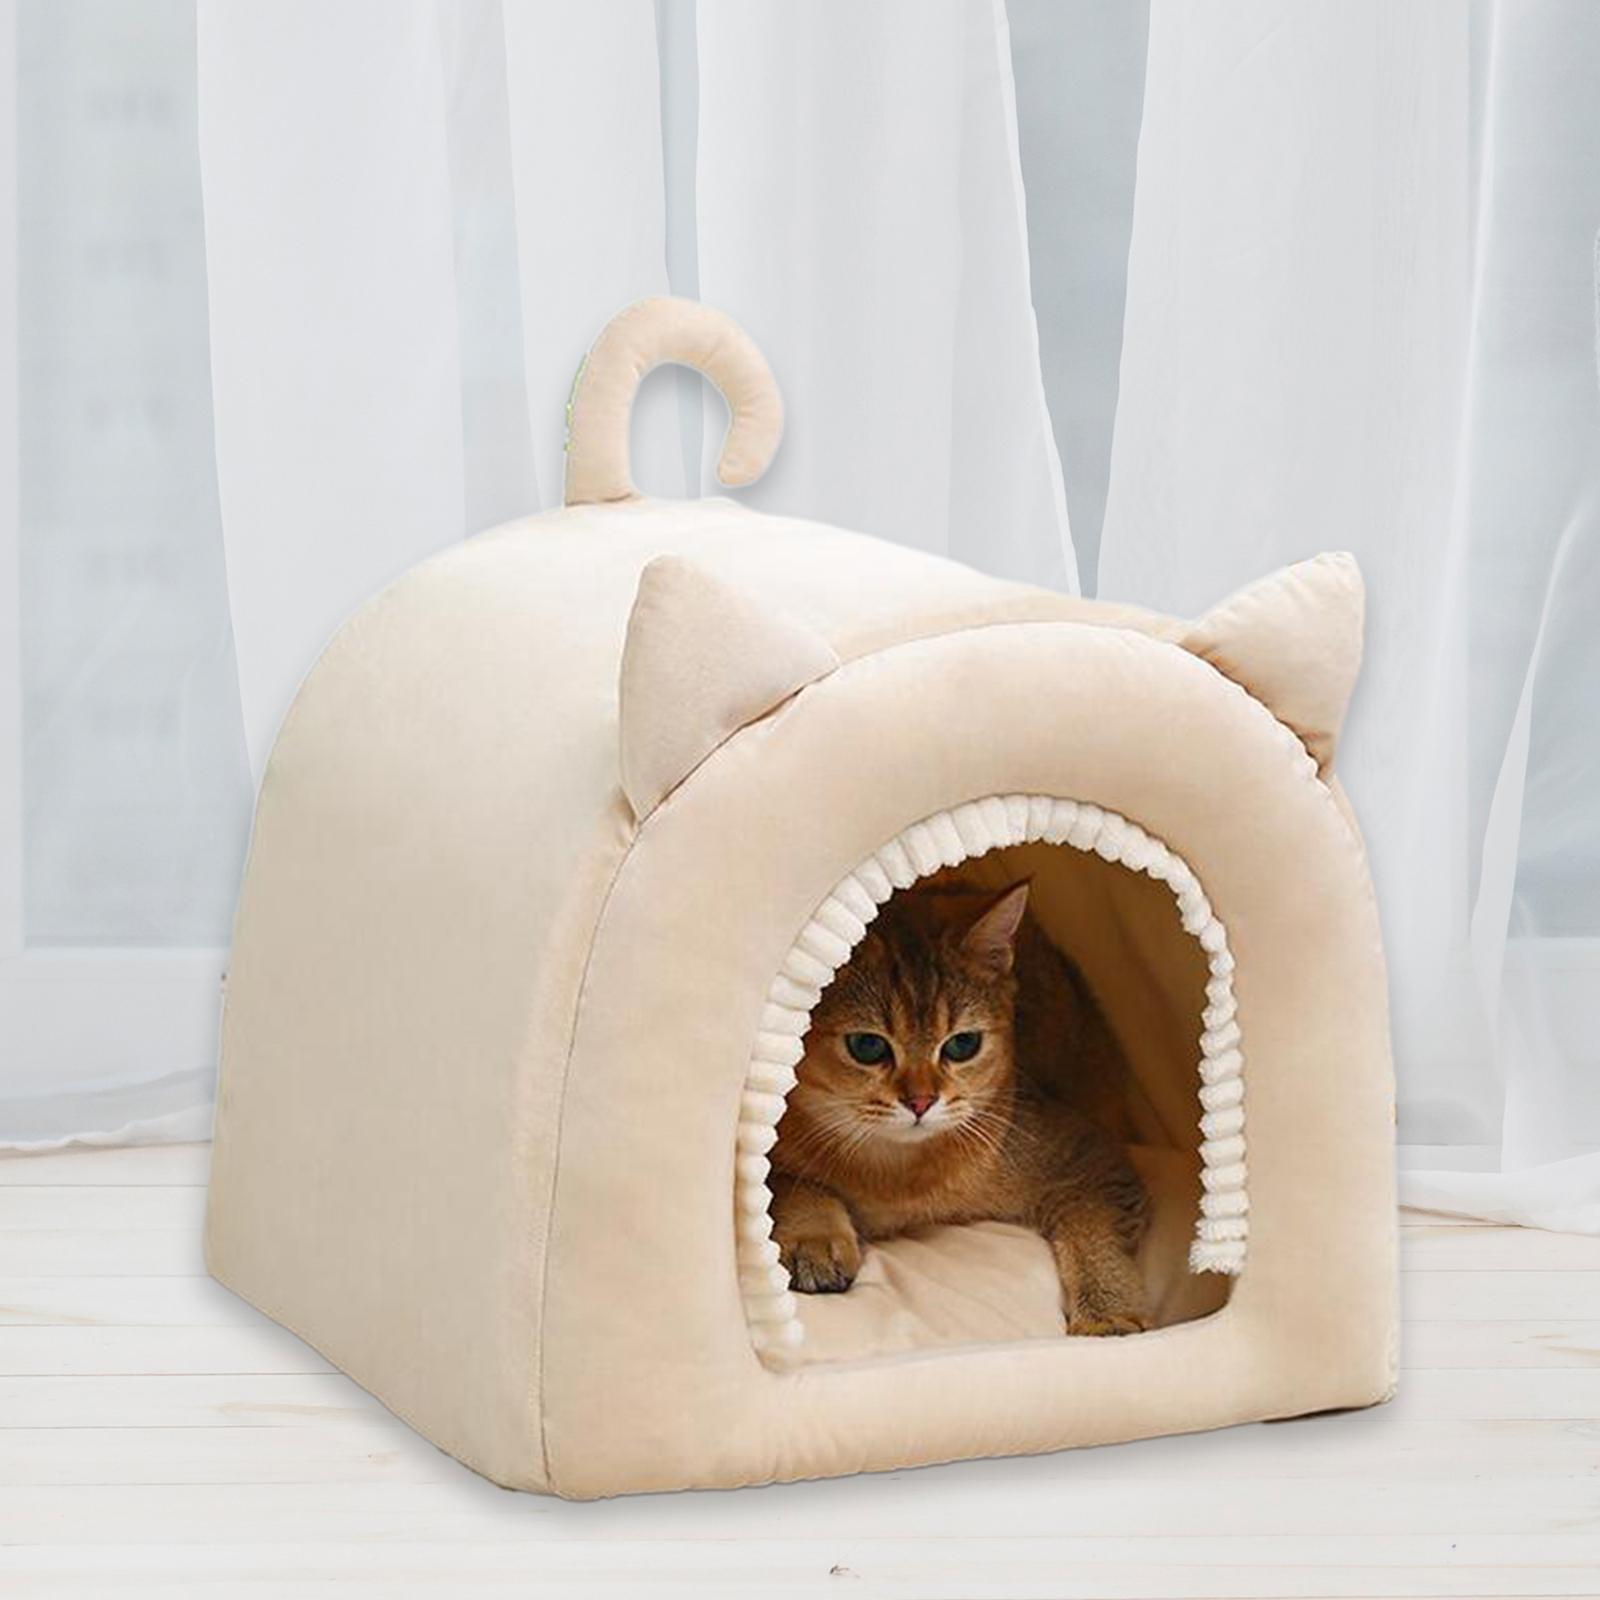 Cave Bed Hut Small Dog Bed Kitten Bed Cat Houses Comfortable Soft